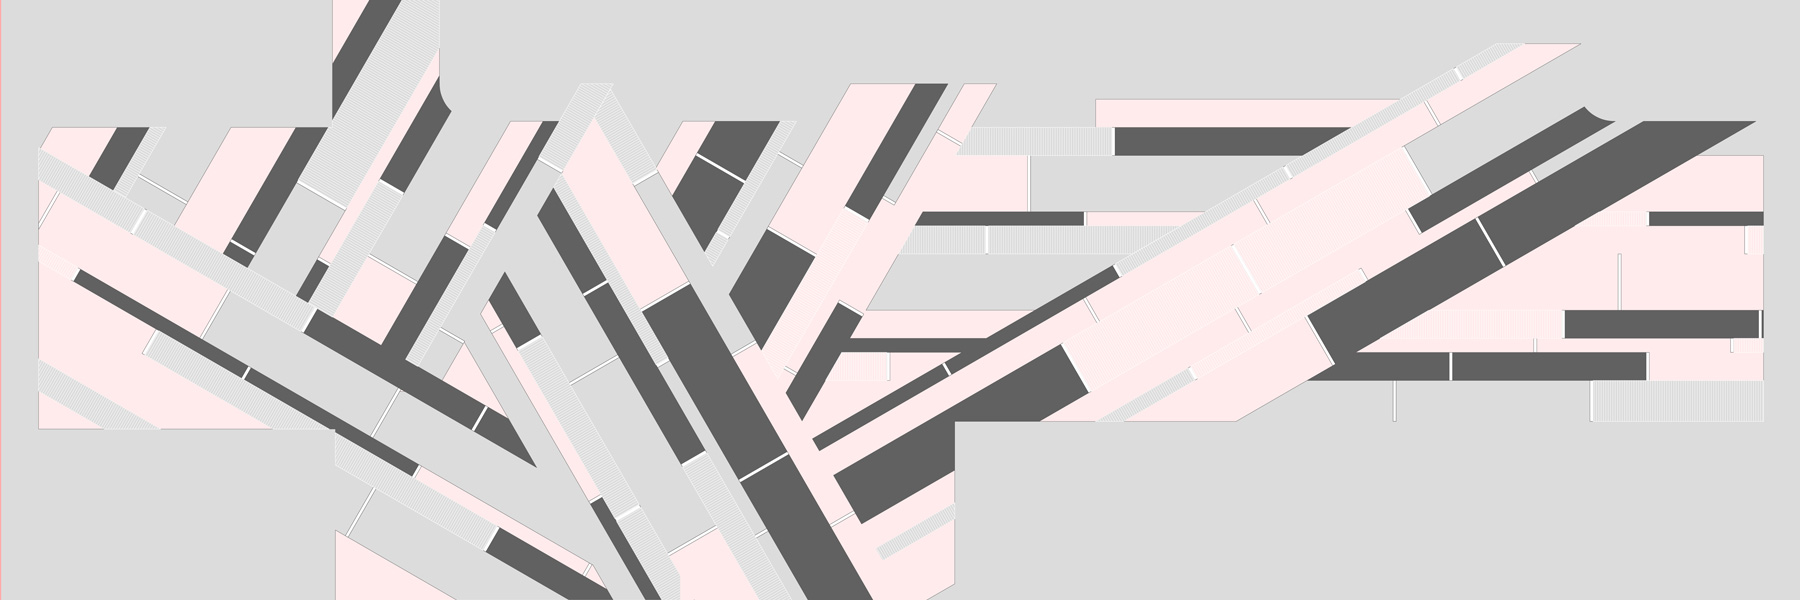 Gray, pink, and black geometric shapes. 